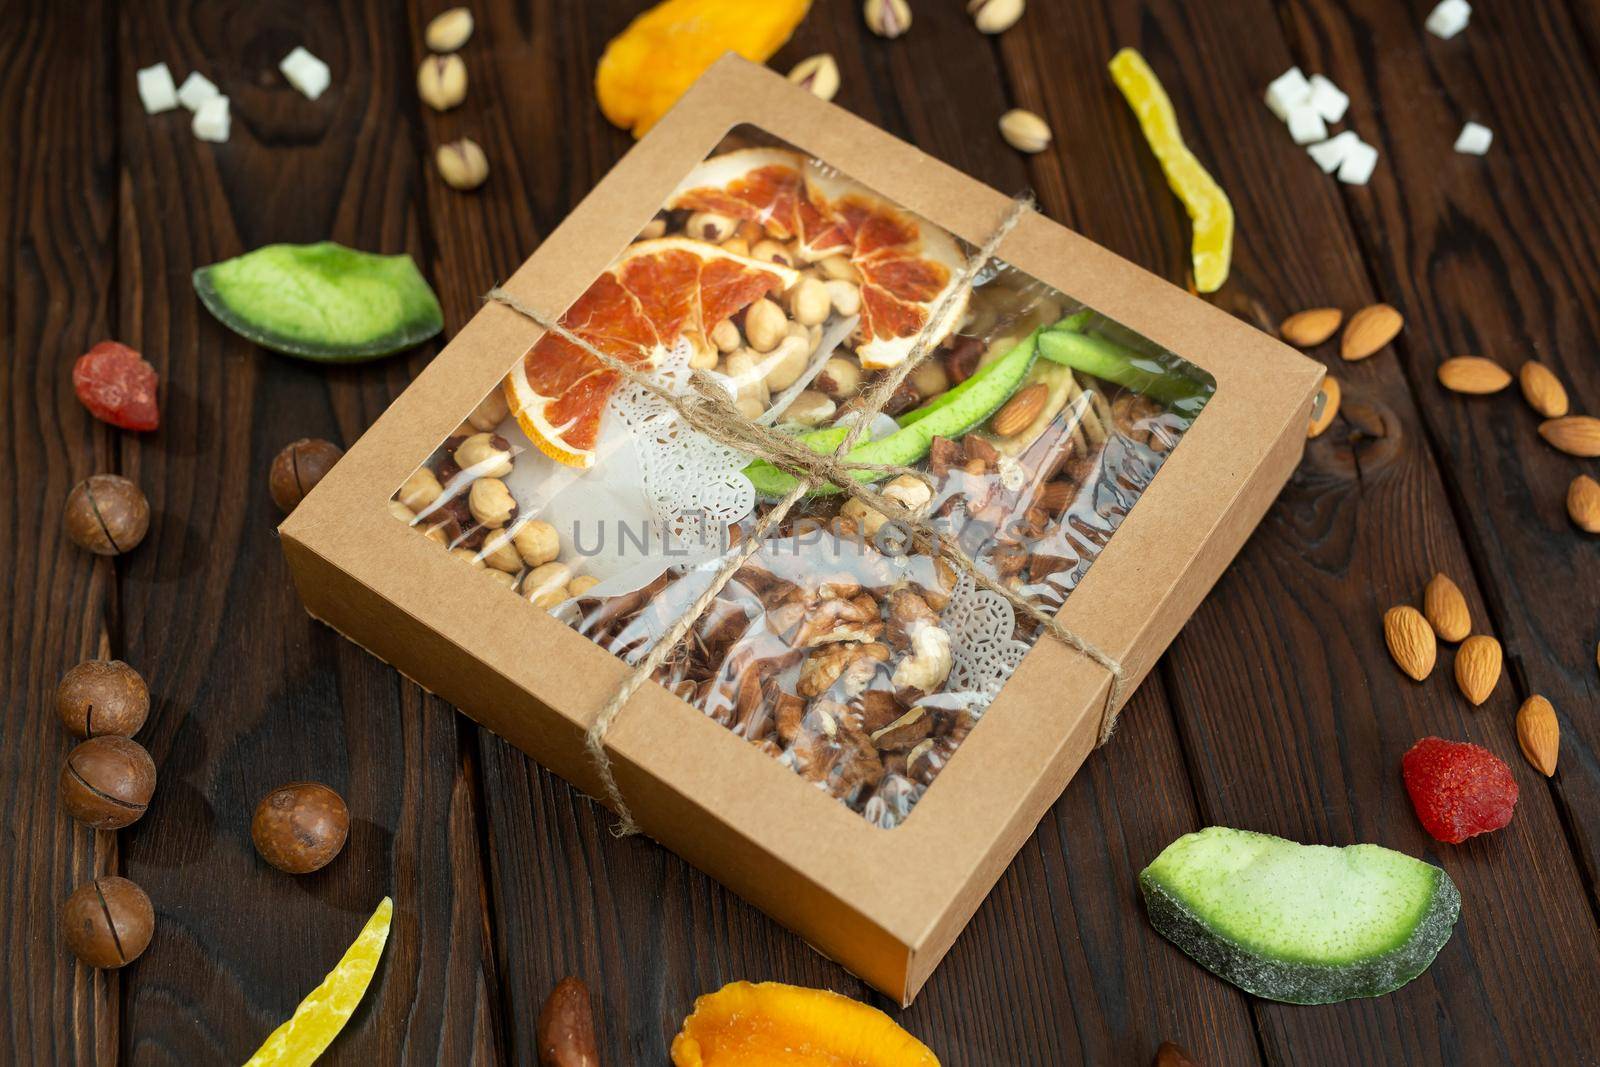 Nuts, candied fruits and dried fruits of different varieties in a paper box on a structural wooden background top view.